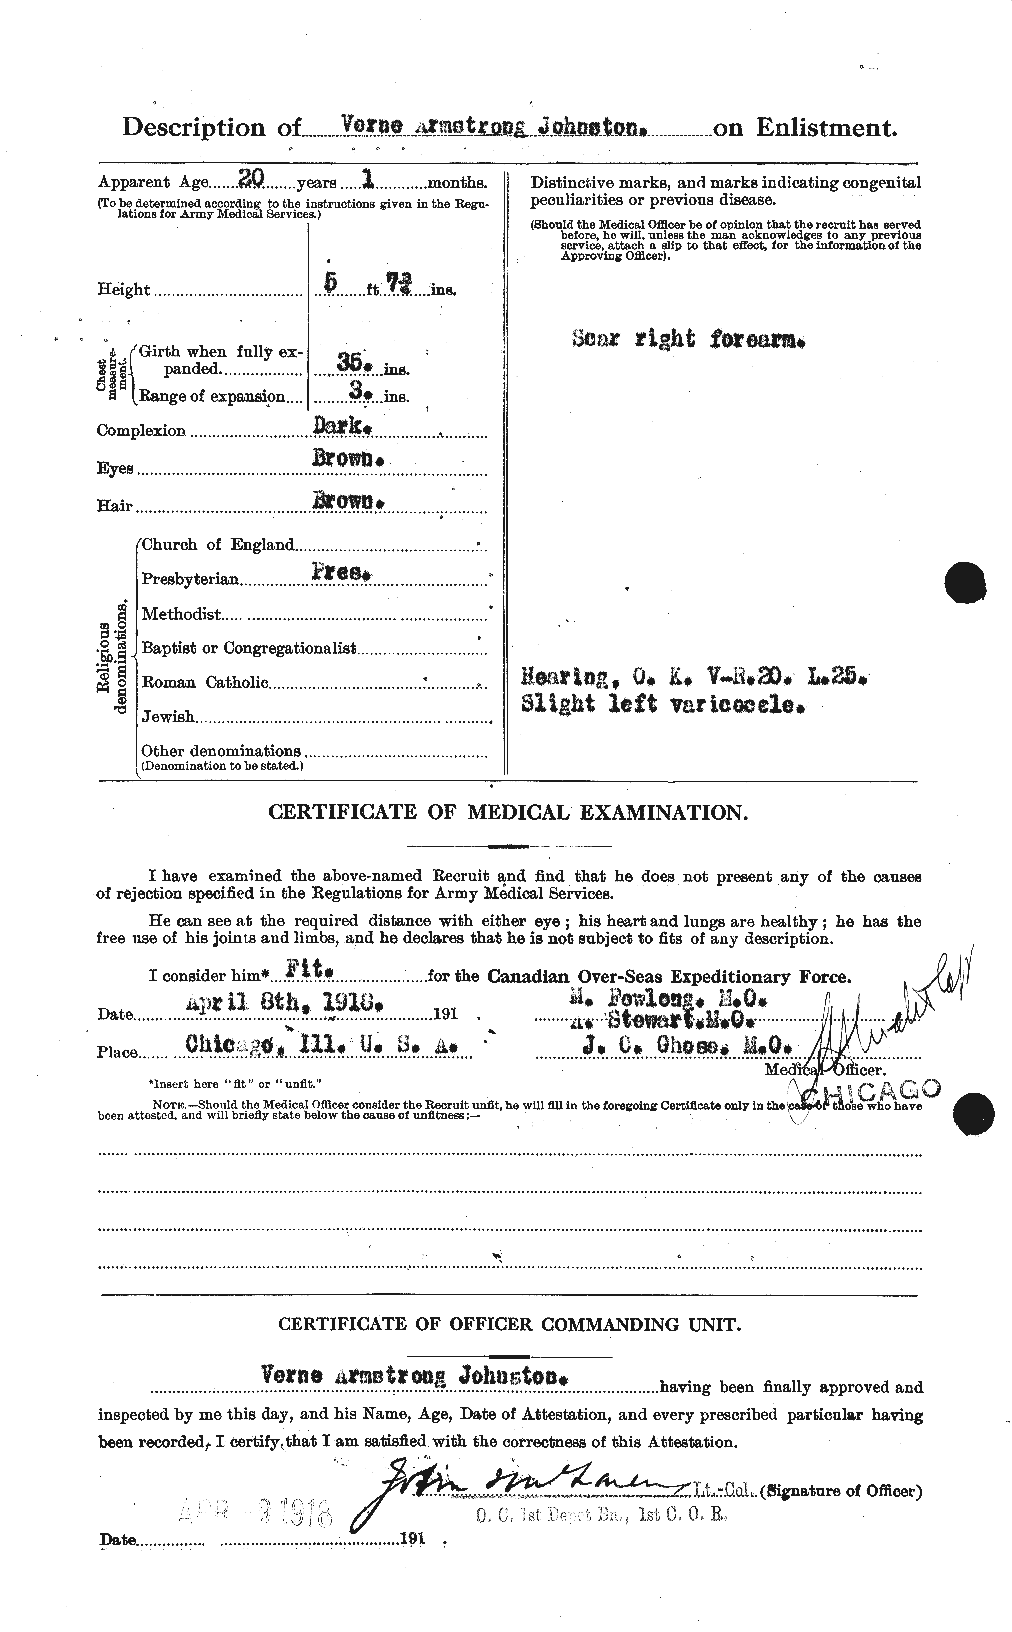 Personnel Records of the First World War - CEF 427186b